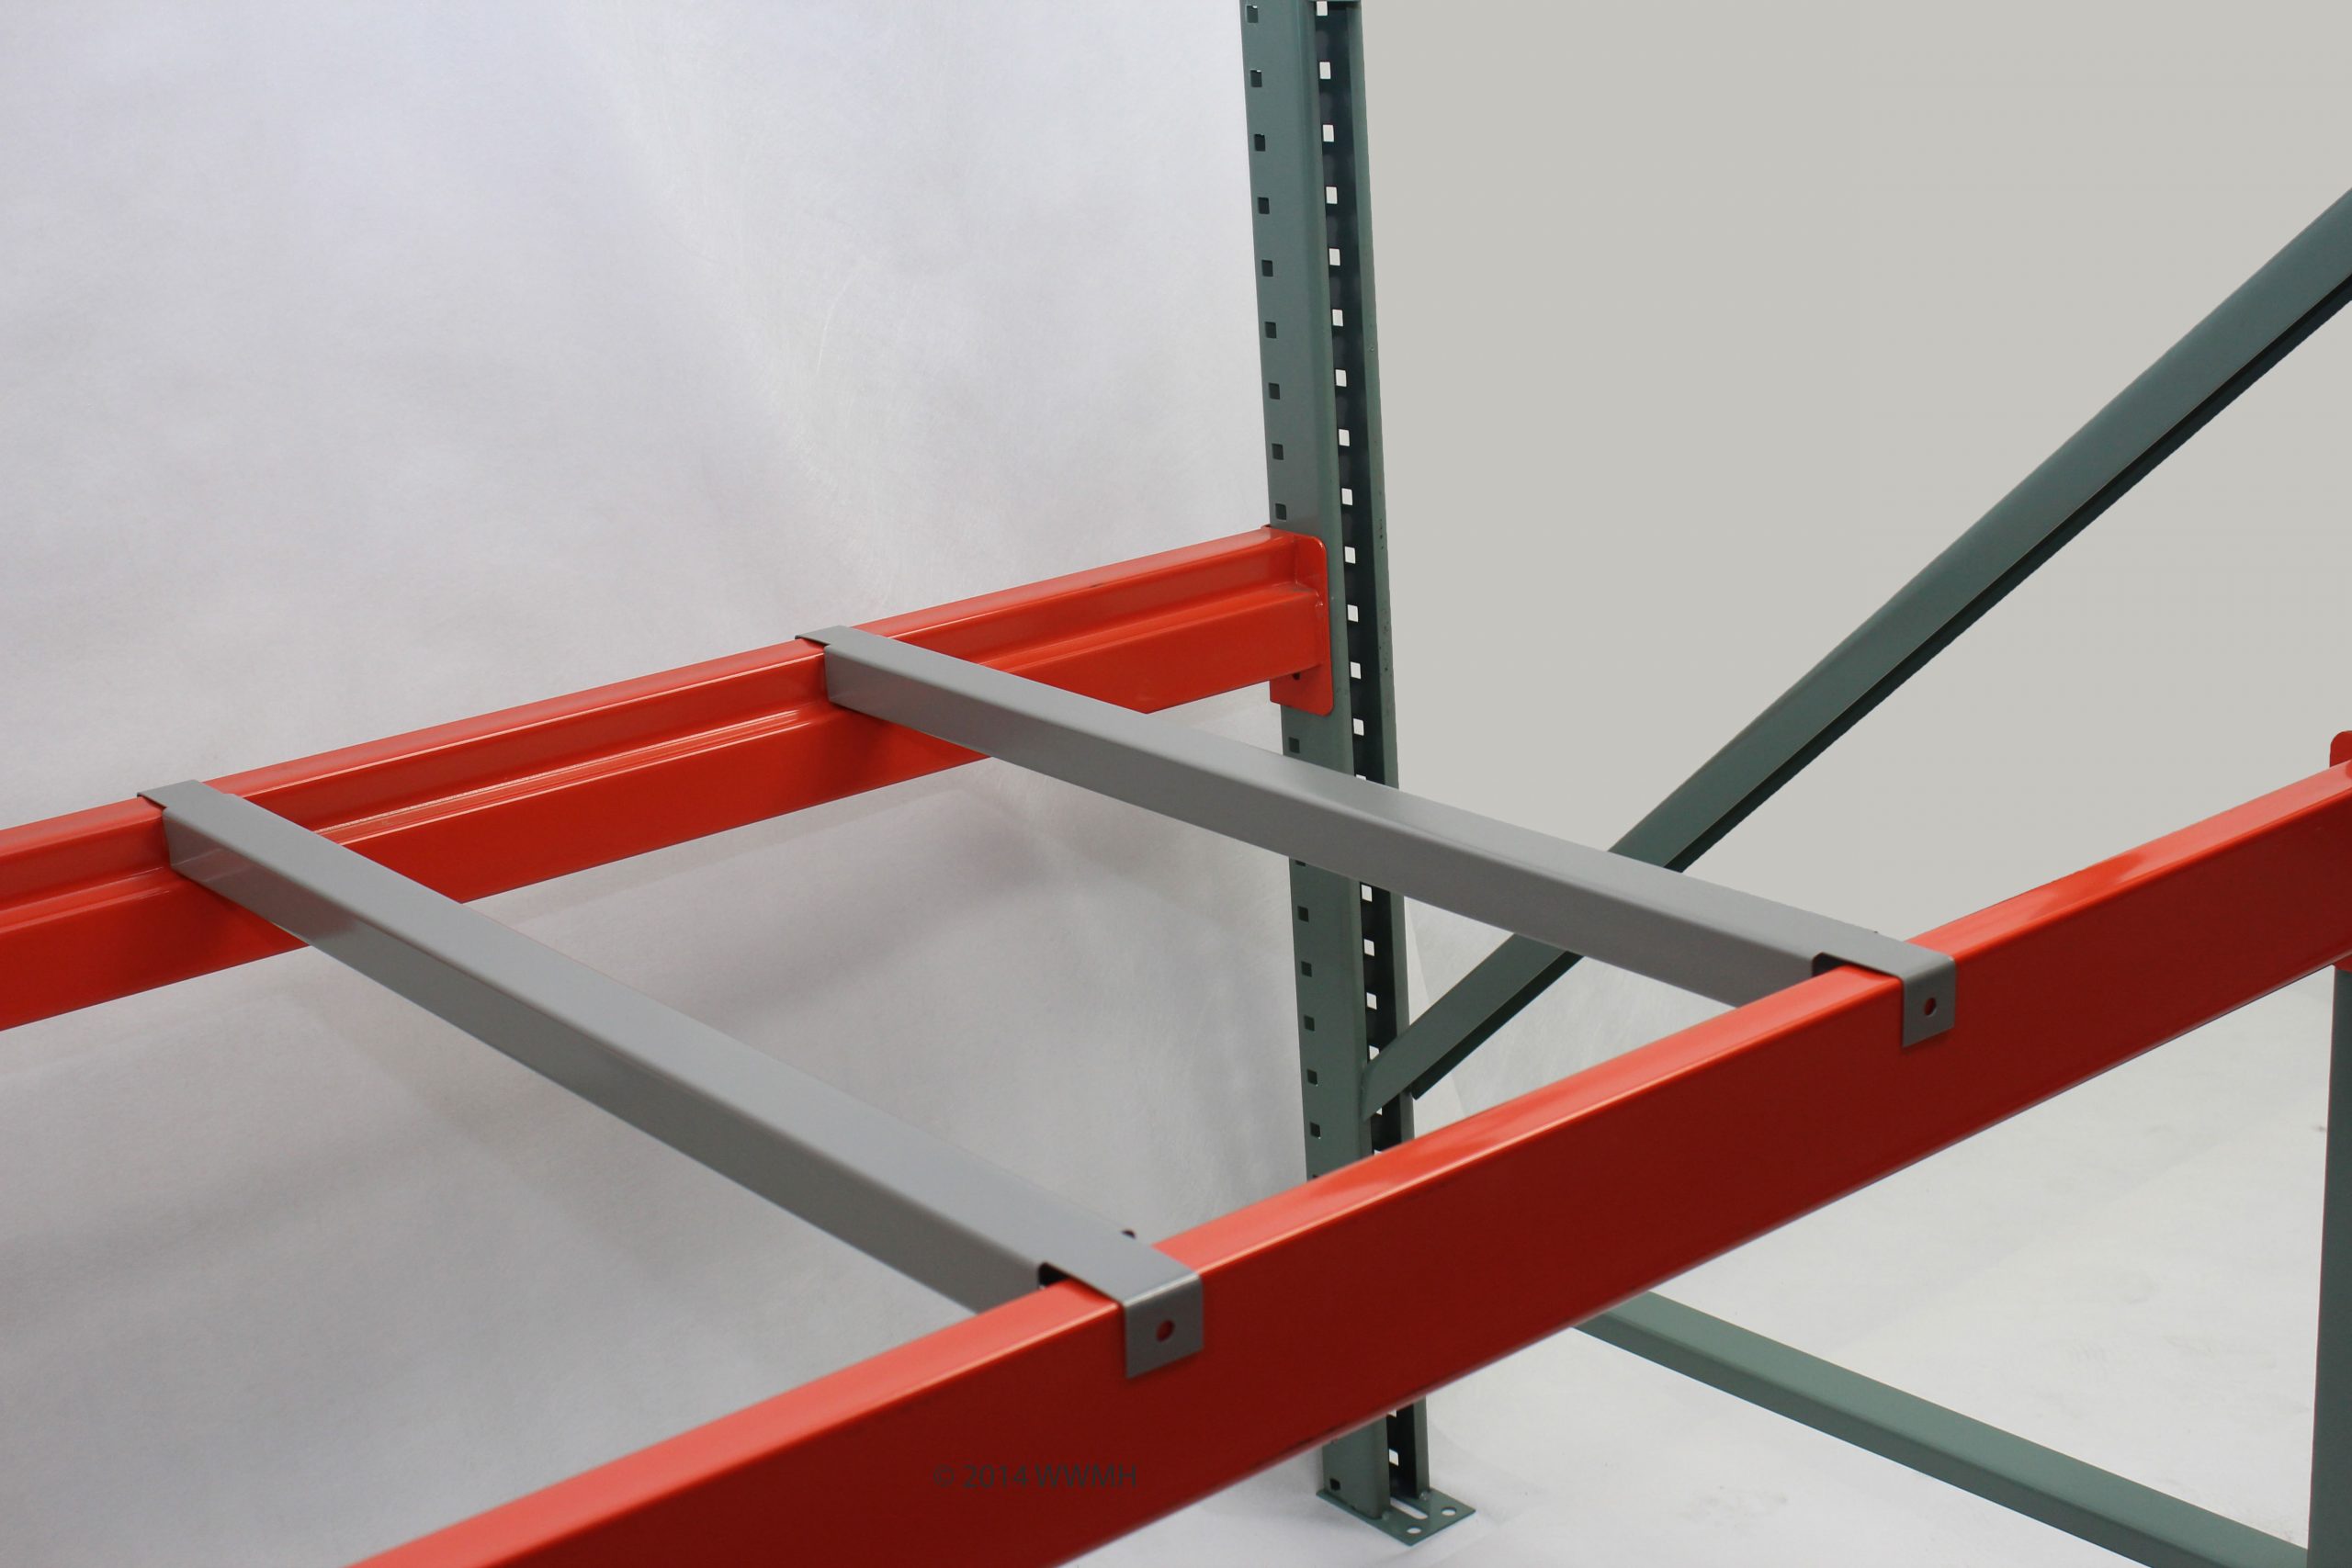 https://www.tpsupplyco.com/cms/wp-content/uploads/2020/10/Double-Flanged-Pallet-Support-scaled.jpg